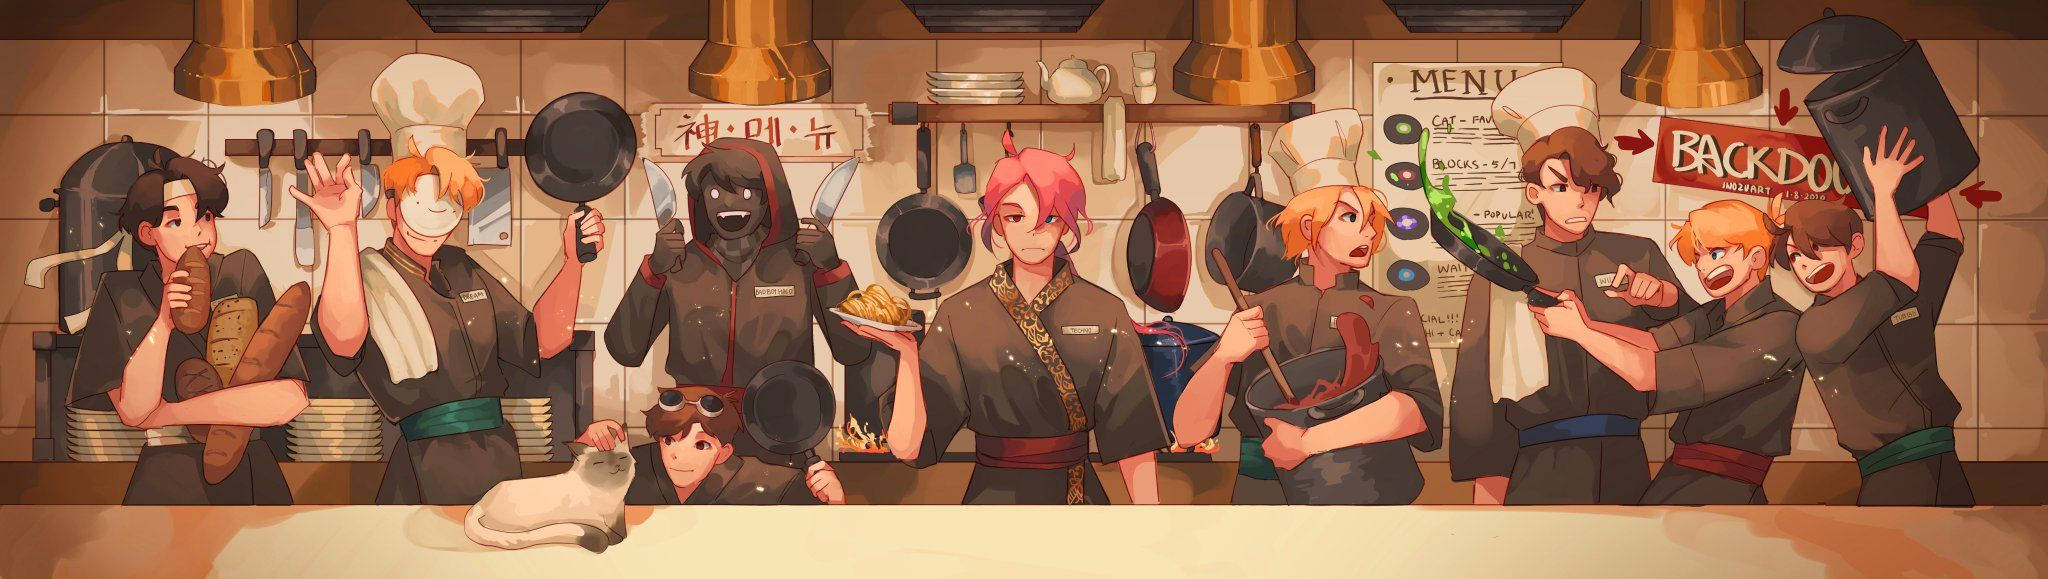 MCYT Cooking Chefs Wallpaper